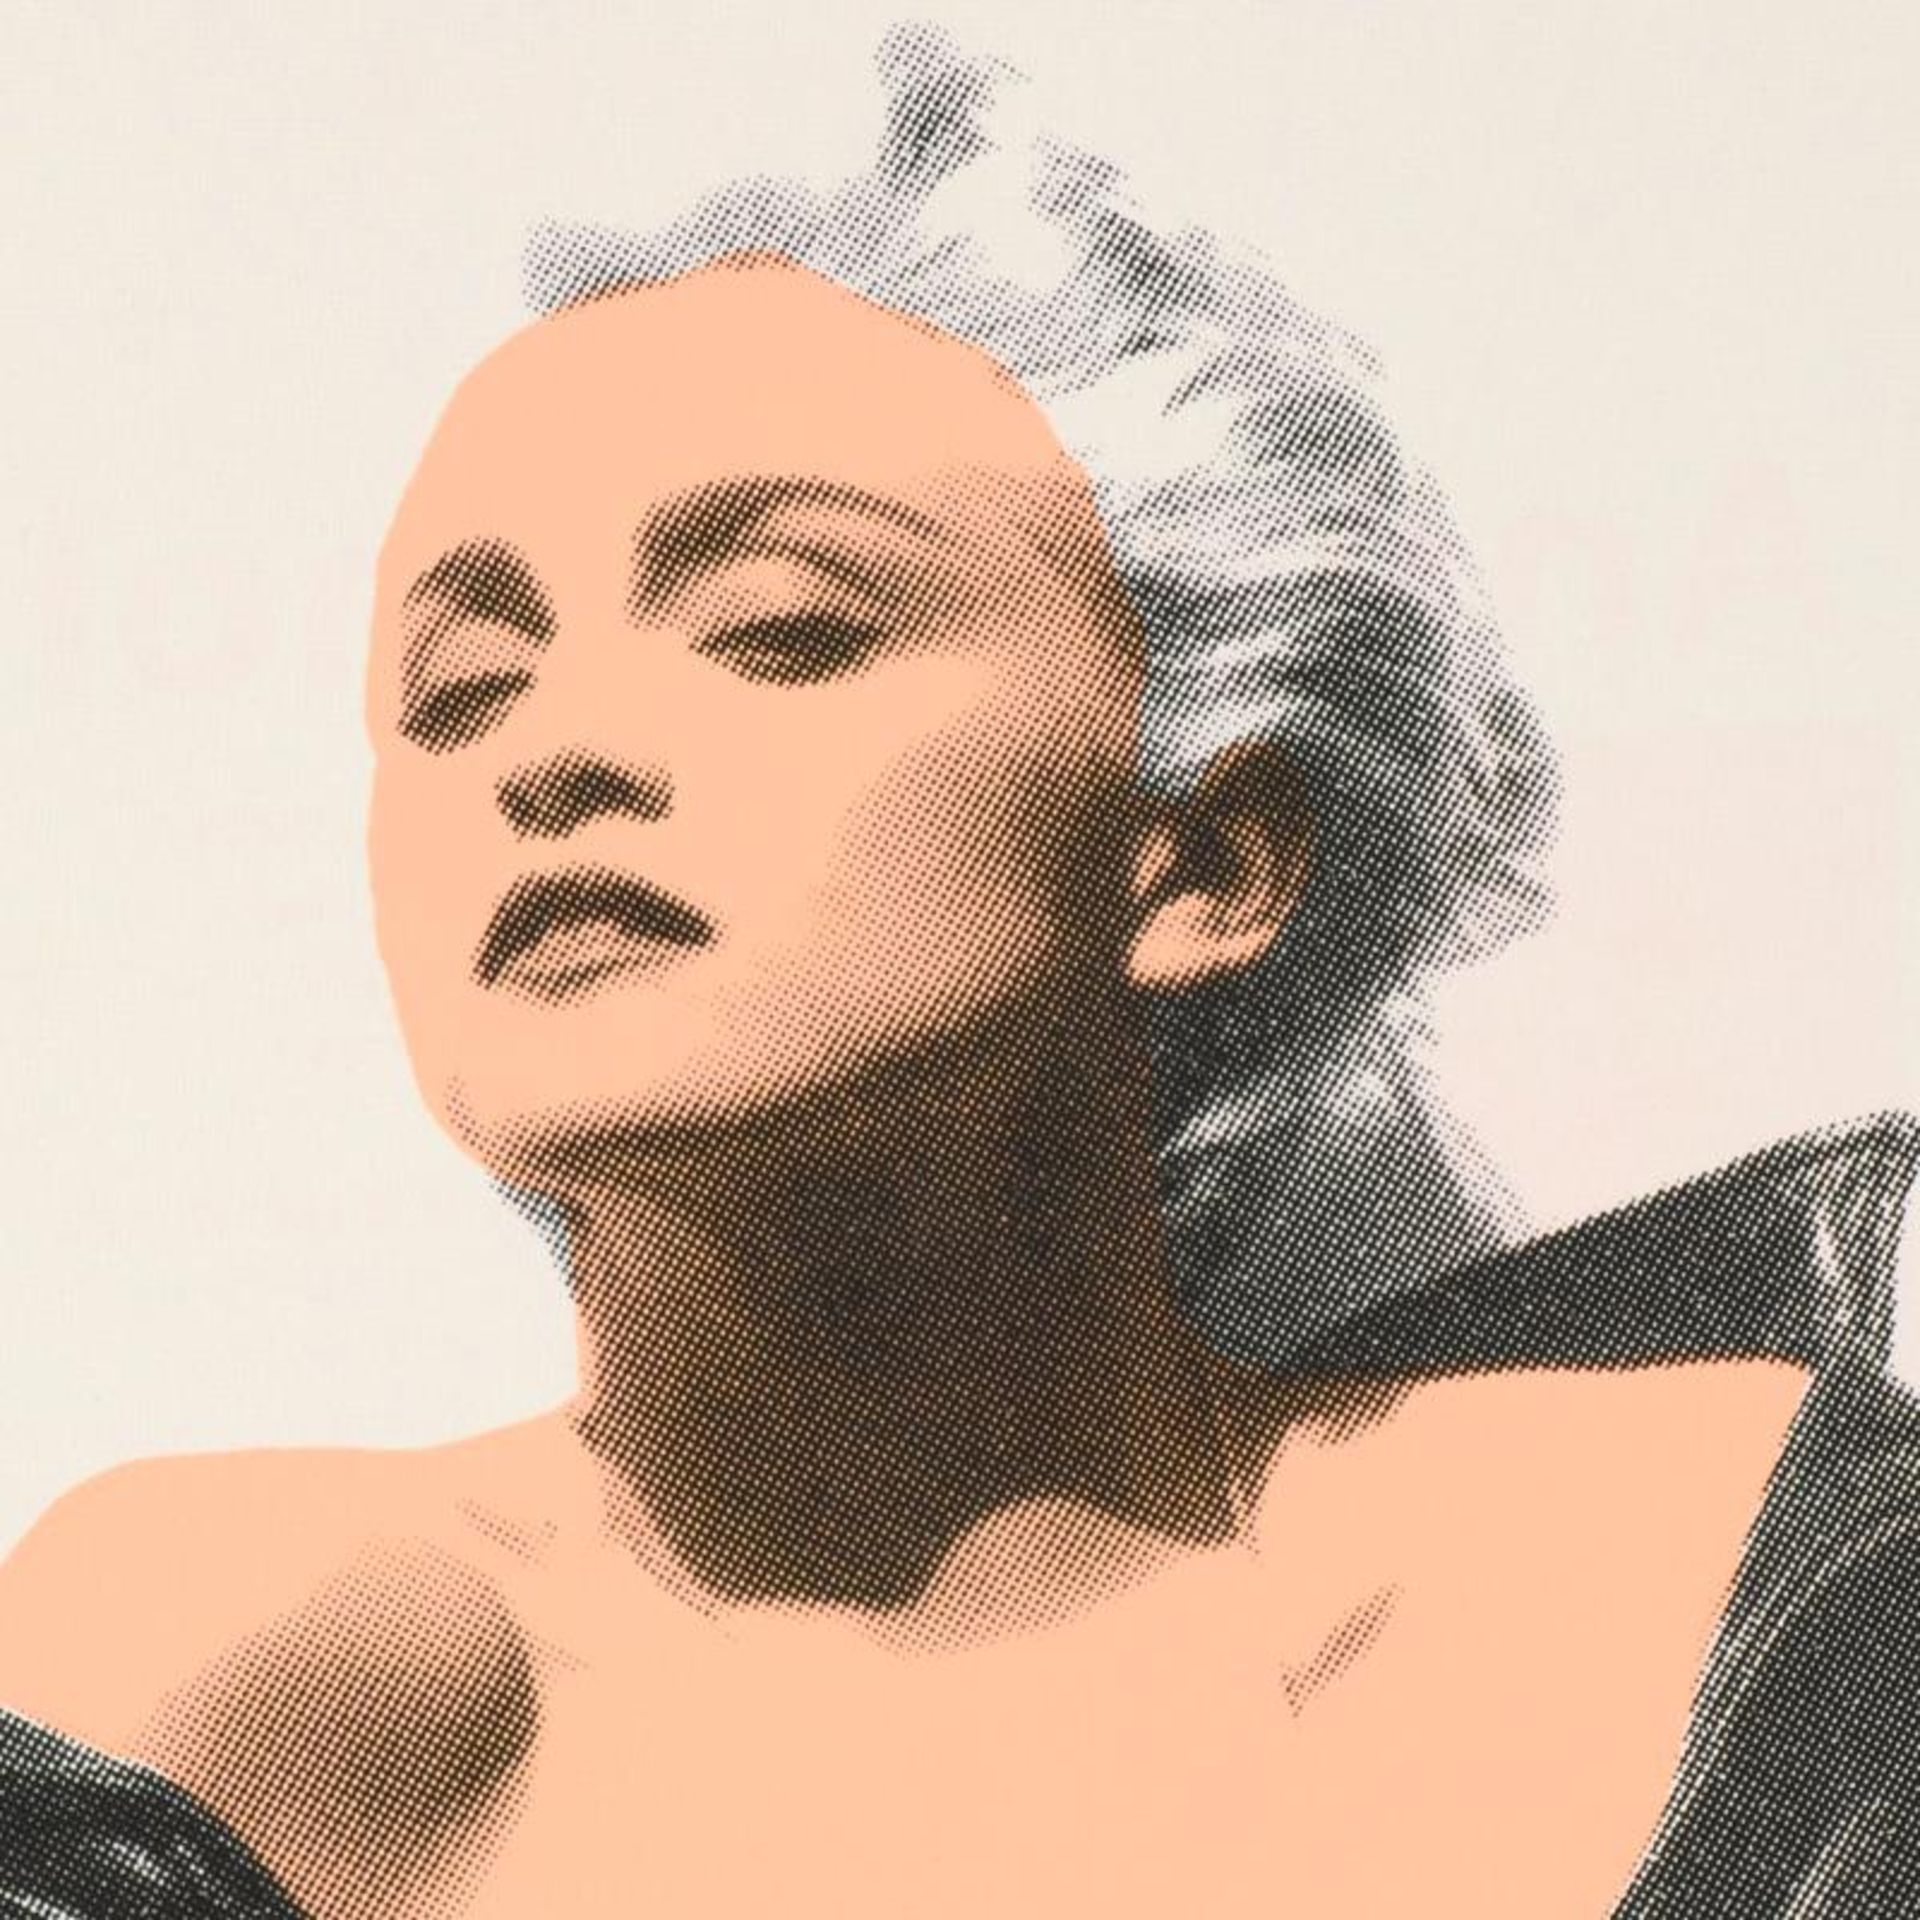 Madonna in Leather by "Ringo" Daniel Funes - Image 2 of 2